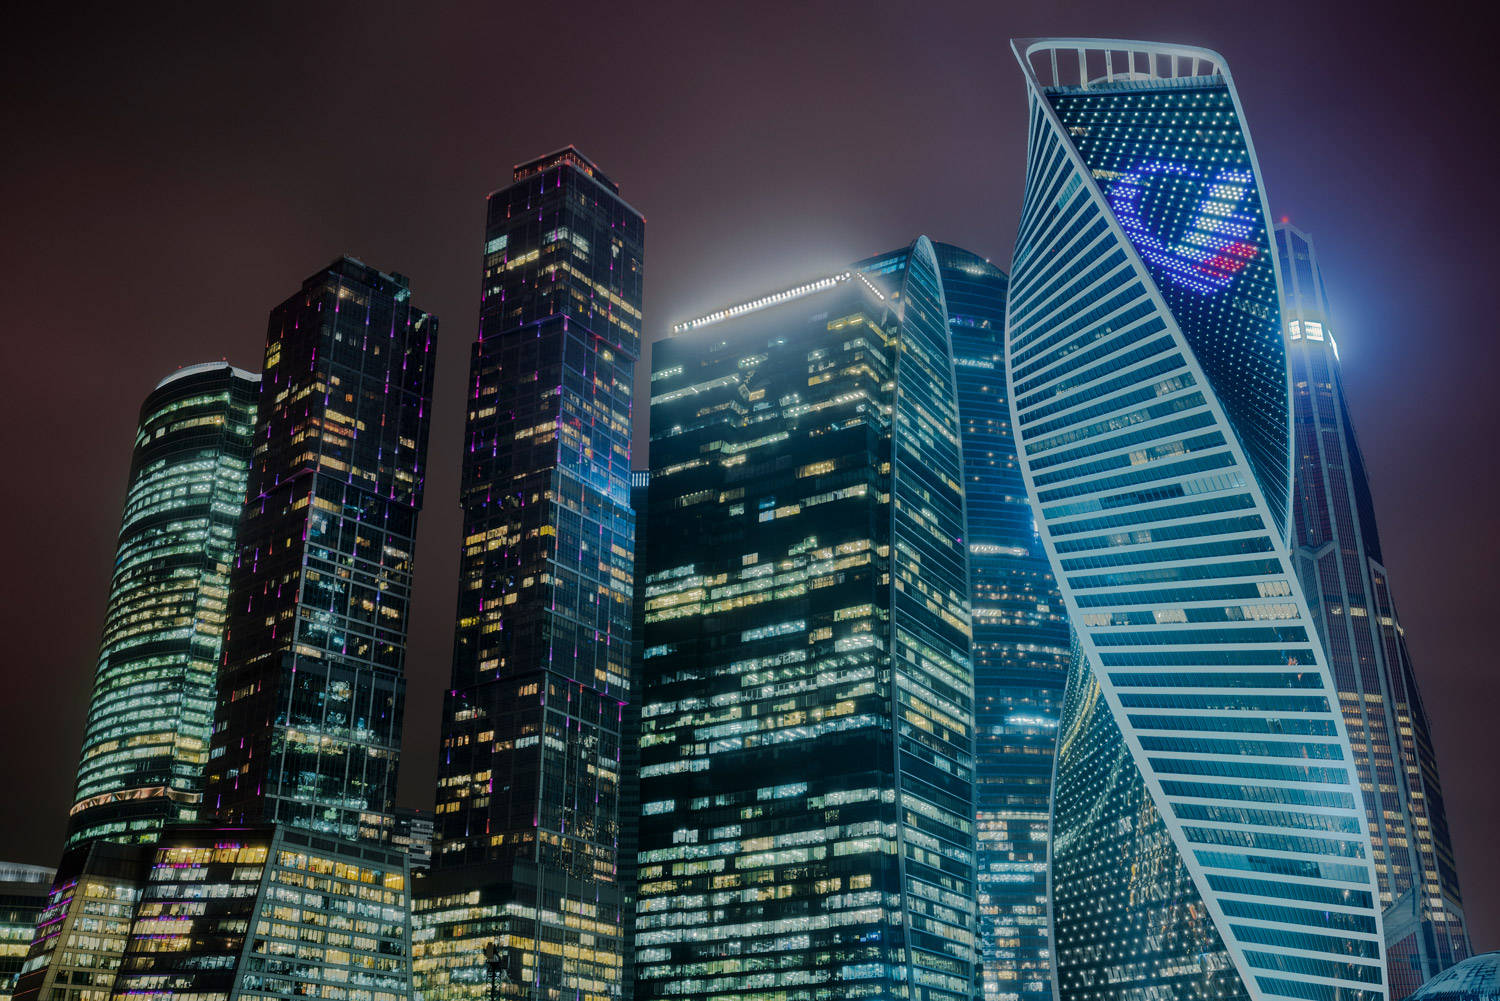 Moscow Illuminated Supertall Skyscrapers Background